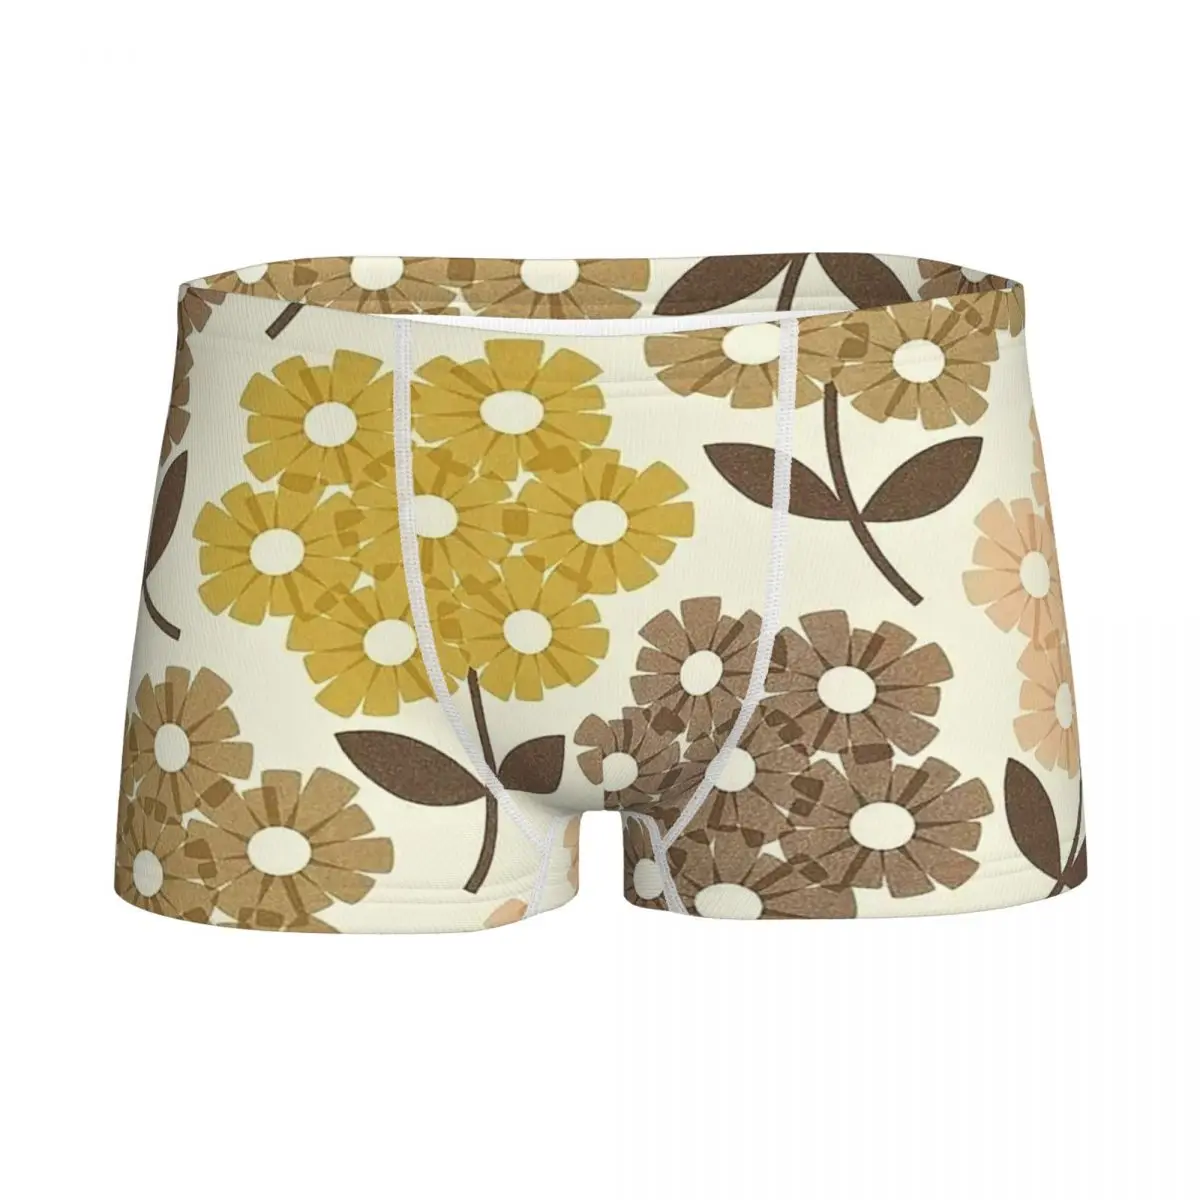 

Boy Orla Kiely Leaf Boxers Cotton Young Underwear Simplicity Man Panties Popularity Teenagers Underpants